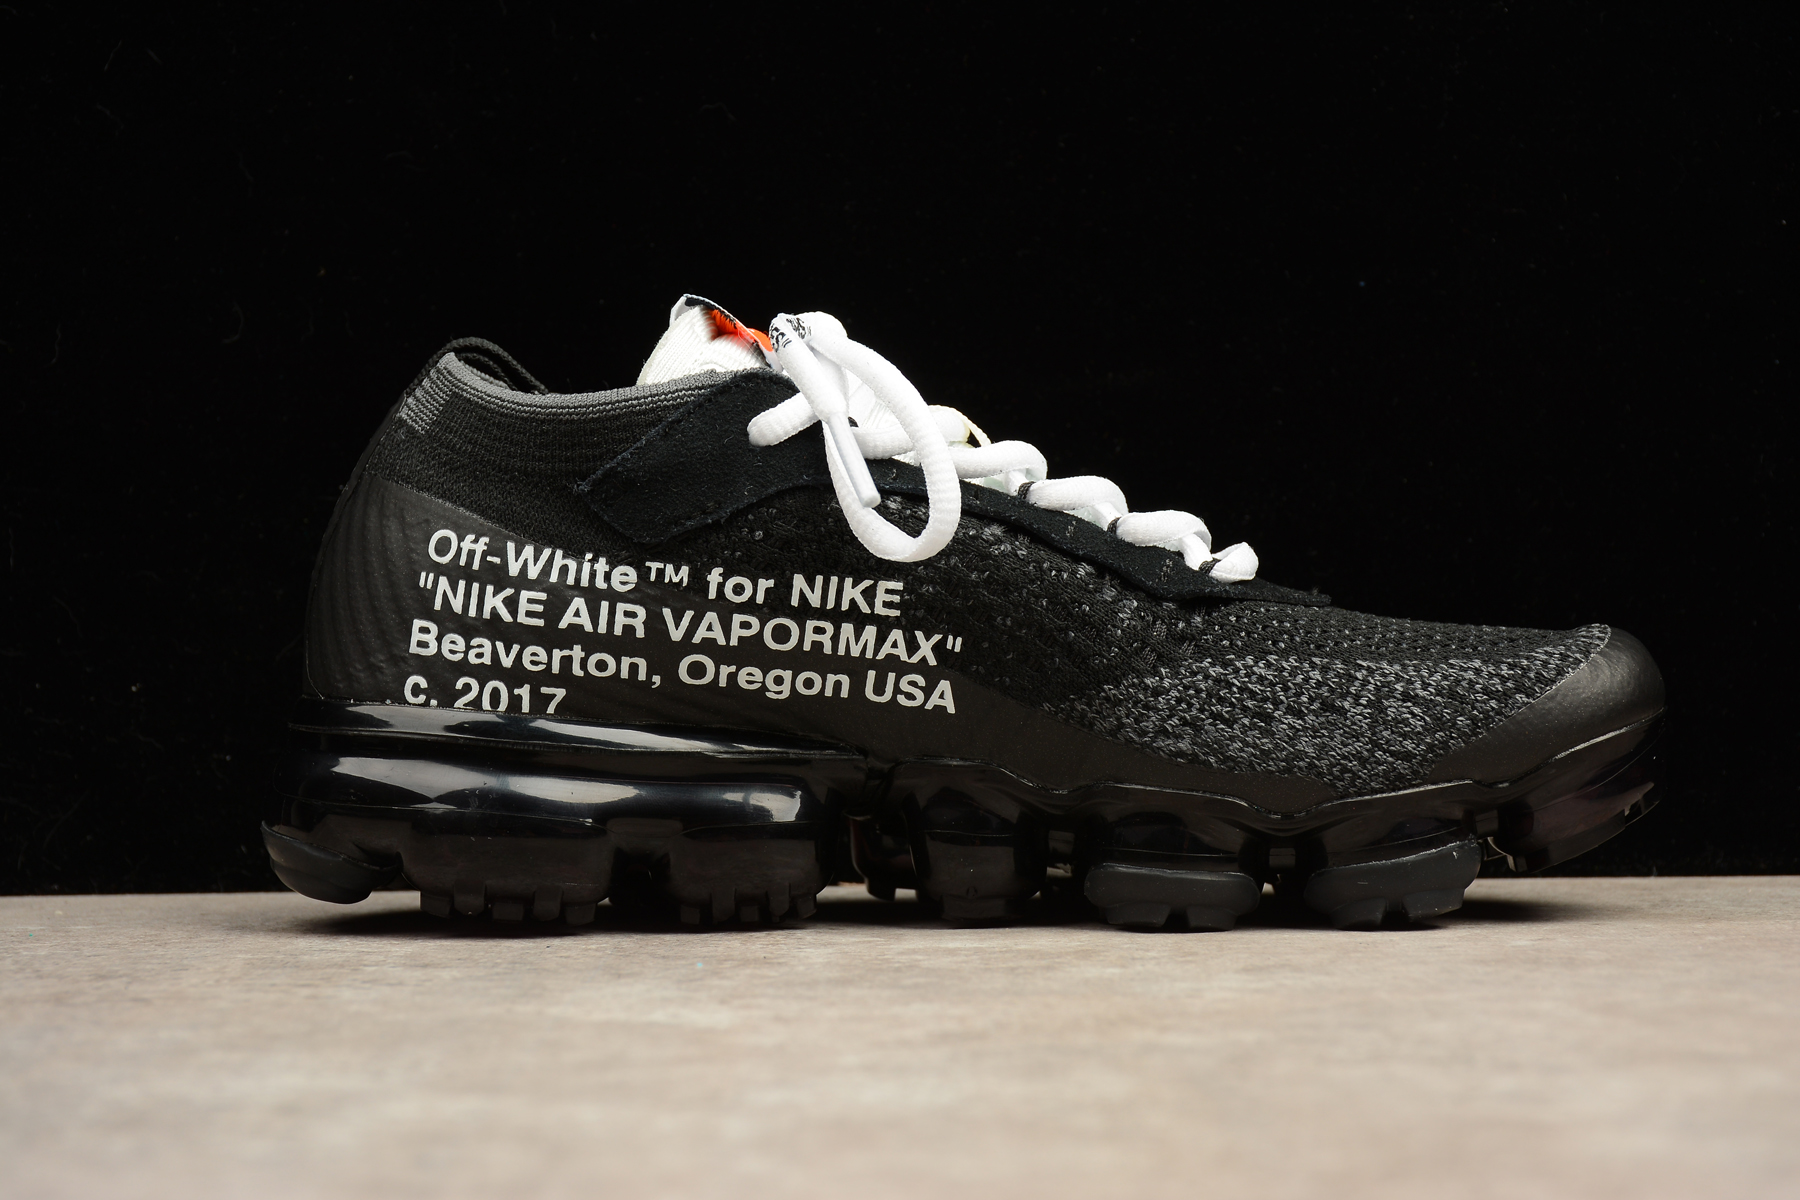 001 - 2018 Off White X Nike Air Max Vapormax Running Shoes Black AA3831 - women leopard nike air future run for kids youtube channel - GmarShops